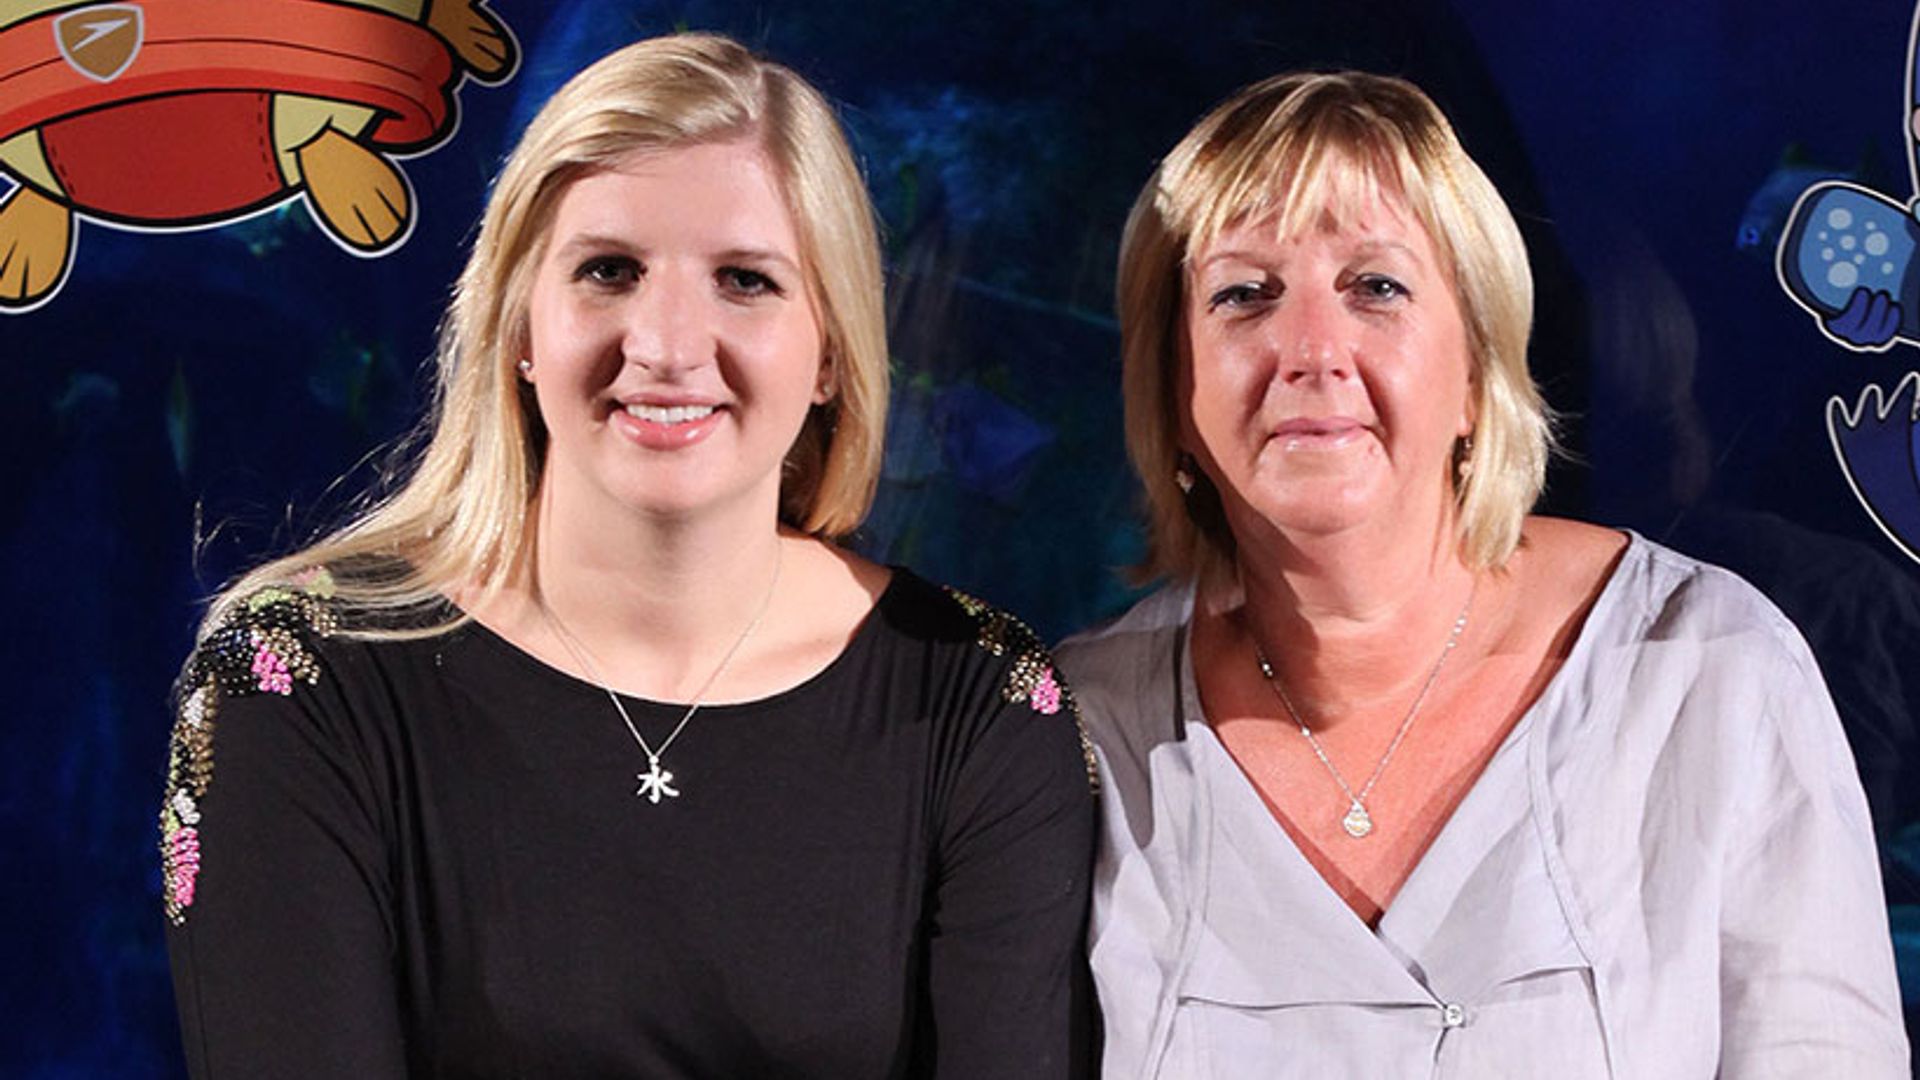 EXCLUSIVE: Rebecca Adlington on her mum's Olympic medal-winning support